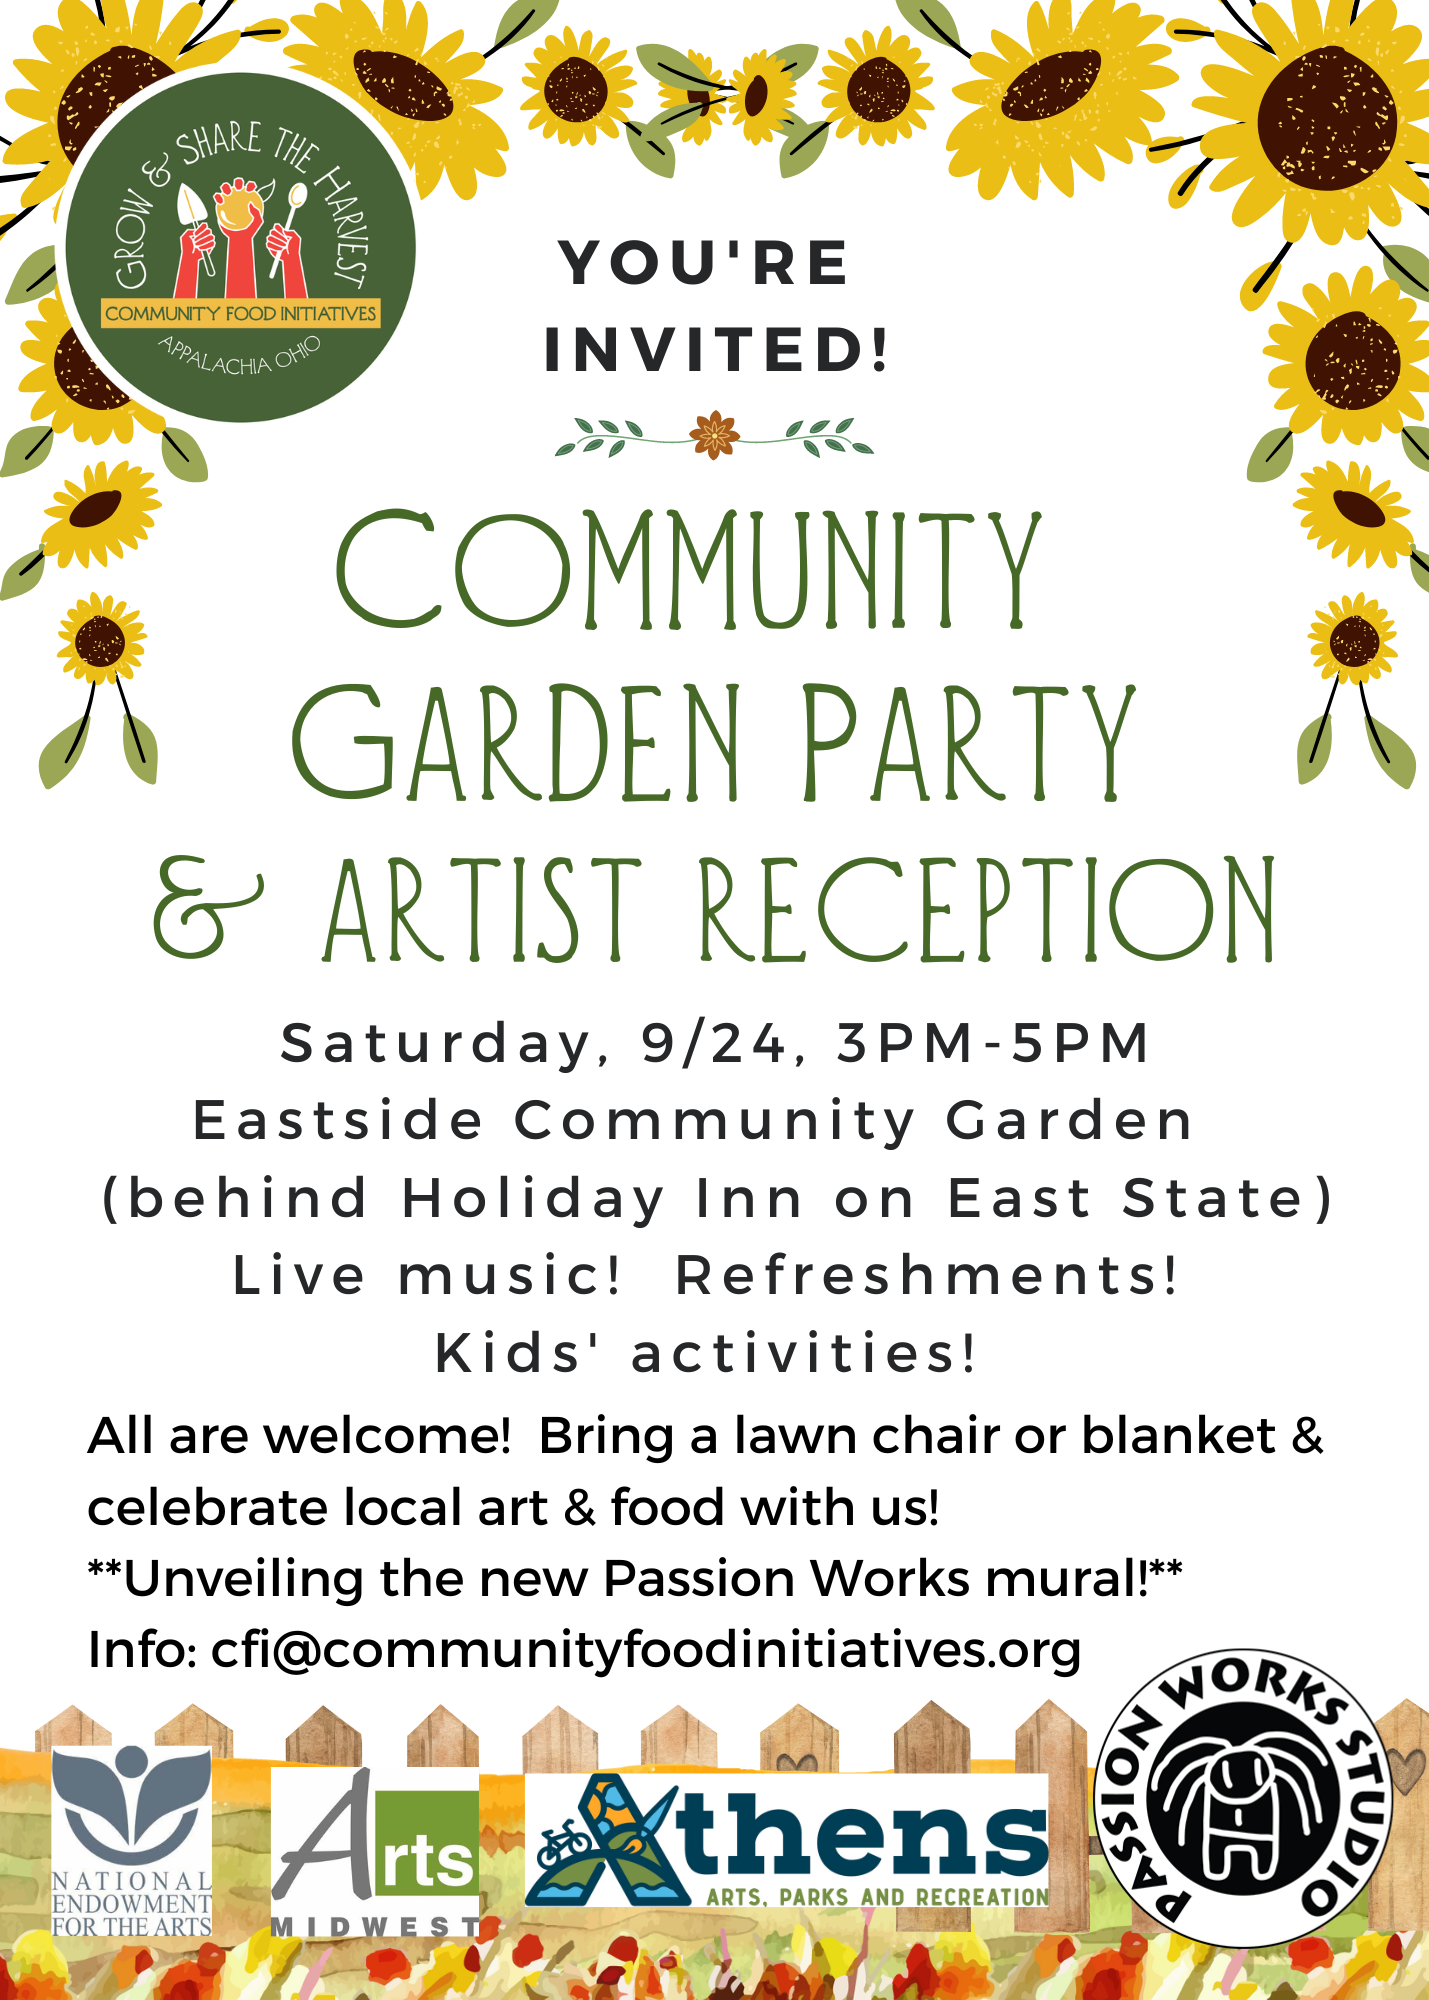 A flyer decorated with sunflower graphics that reads: You’re invited! Community Garden party and artist reception Saturday, 9/24, 3 p.m. to 5 p.m. Eastside Community Garden (behind Holiday Inn on East State) Live music! Refreshments! Kid’s activities! All are welcome! Bring a lawn chair or blanket and celebrate local art and food with us unveiling the new passion works mural info: chi@communityfoodinitiatives.org.